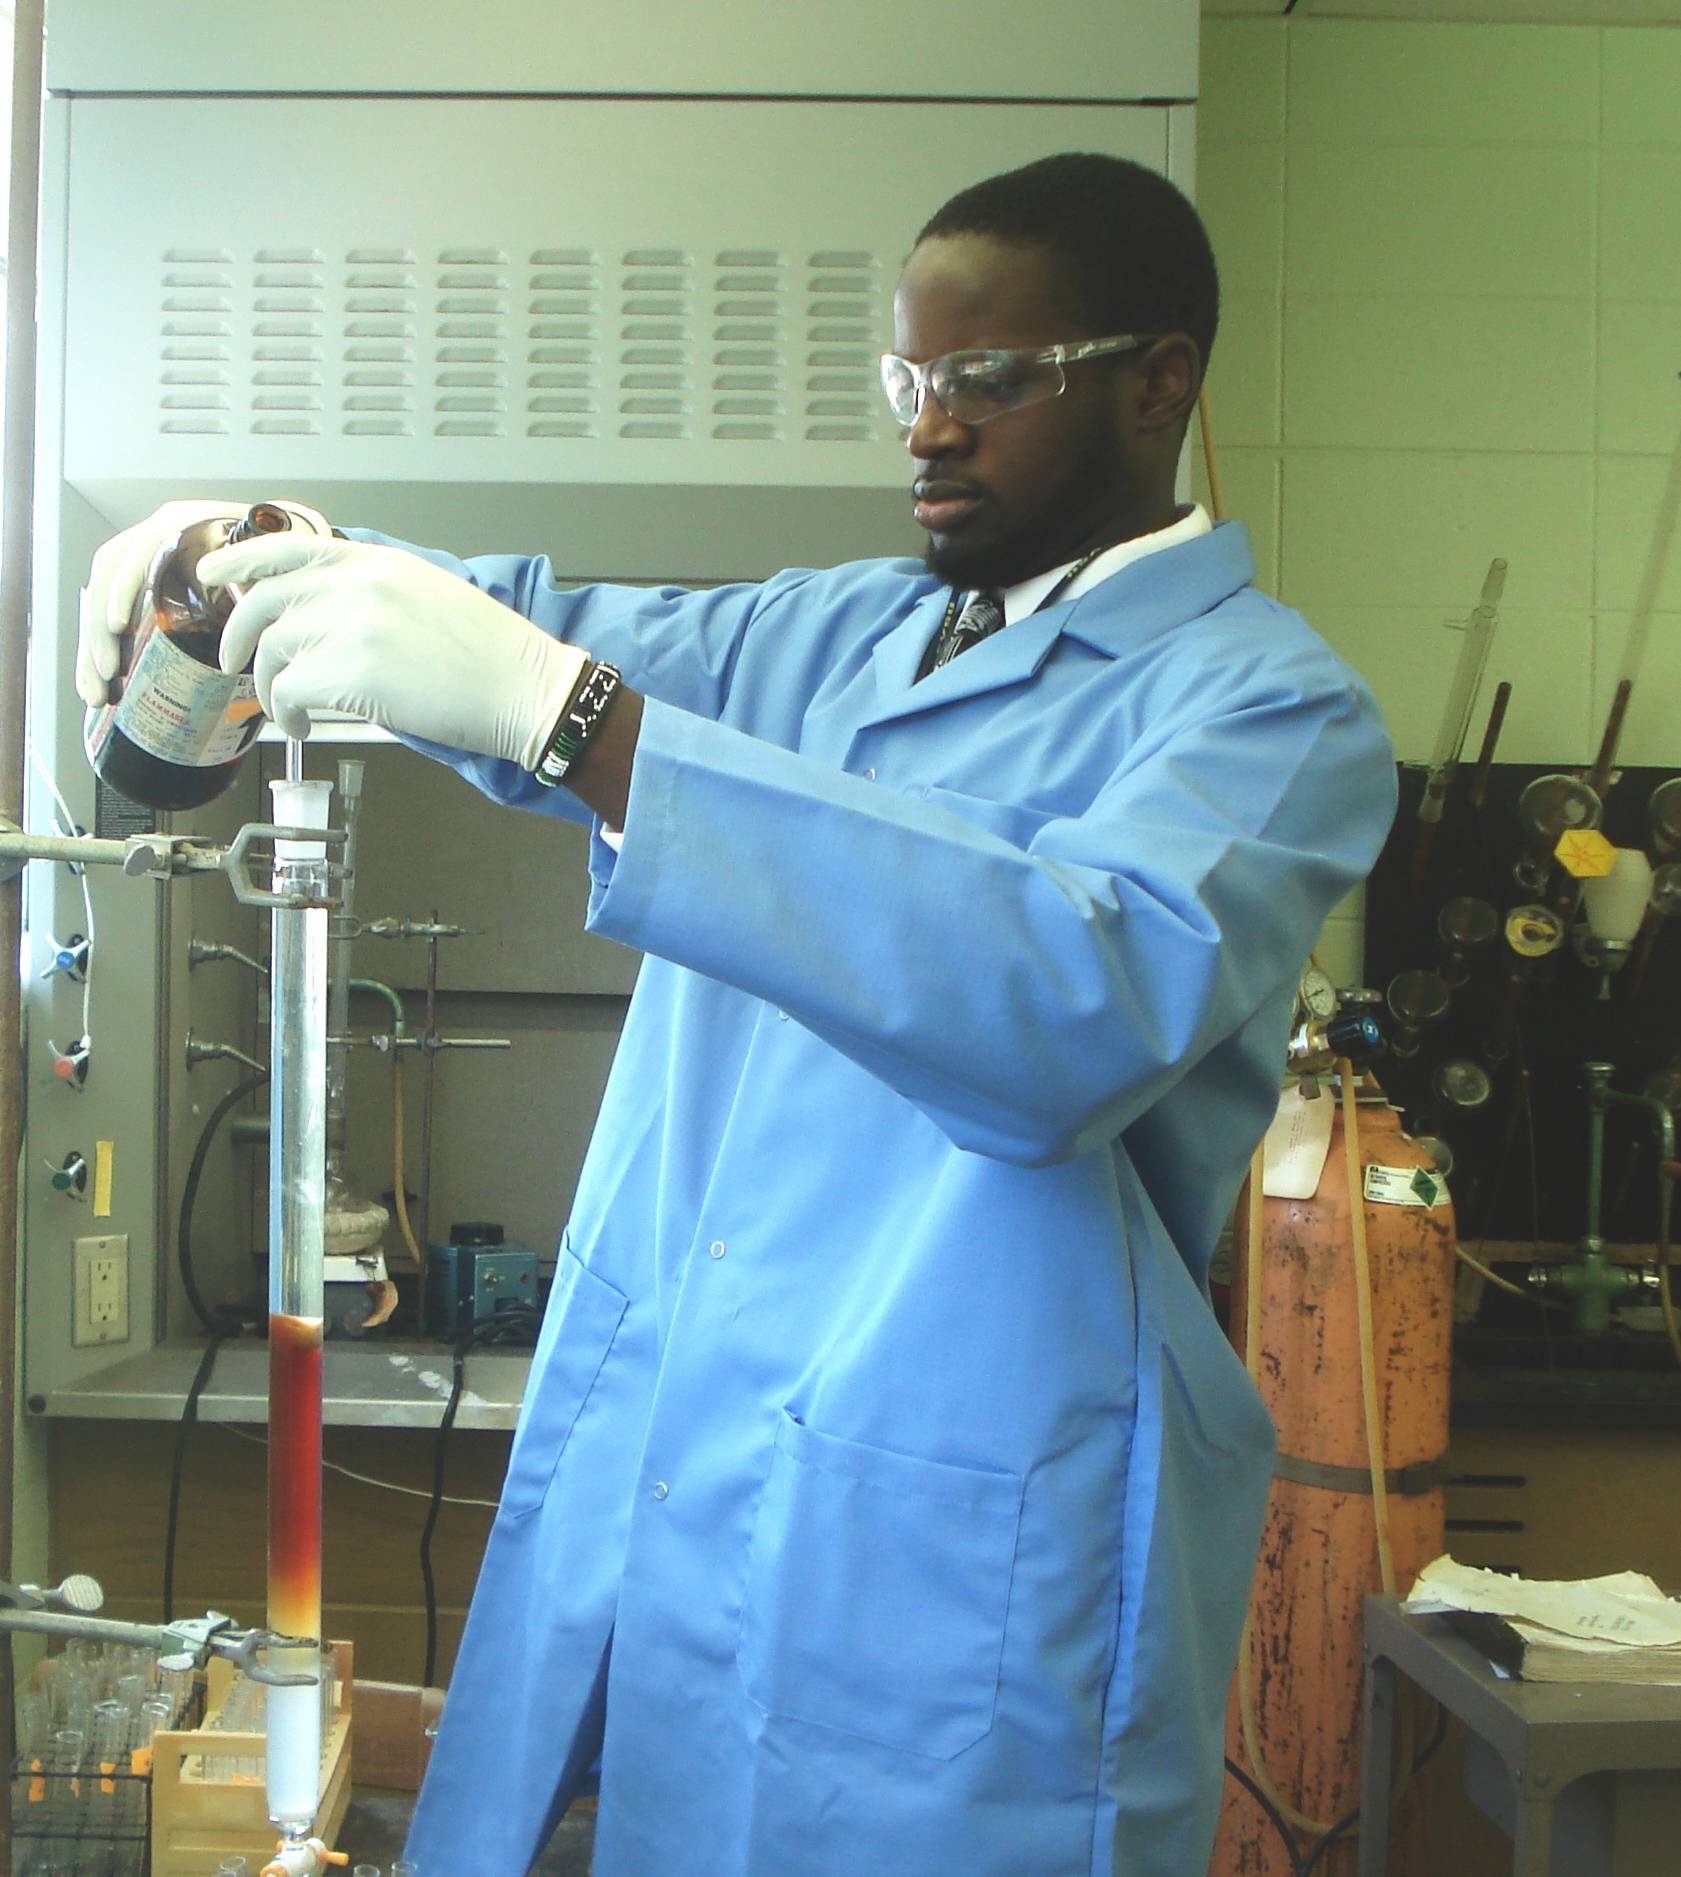 Man in blue labcoat pouring a container into a beaker